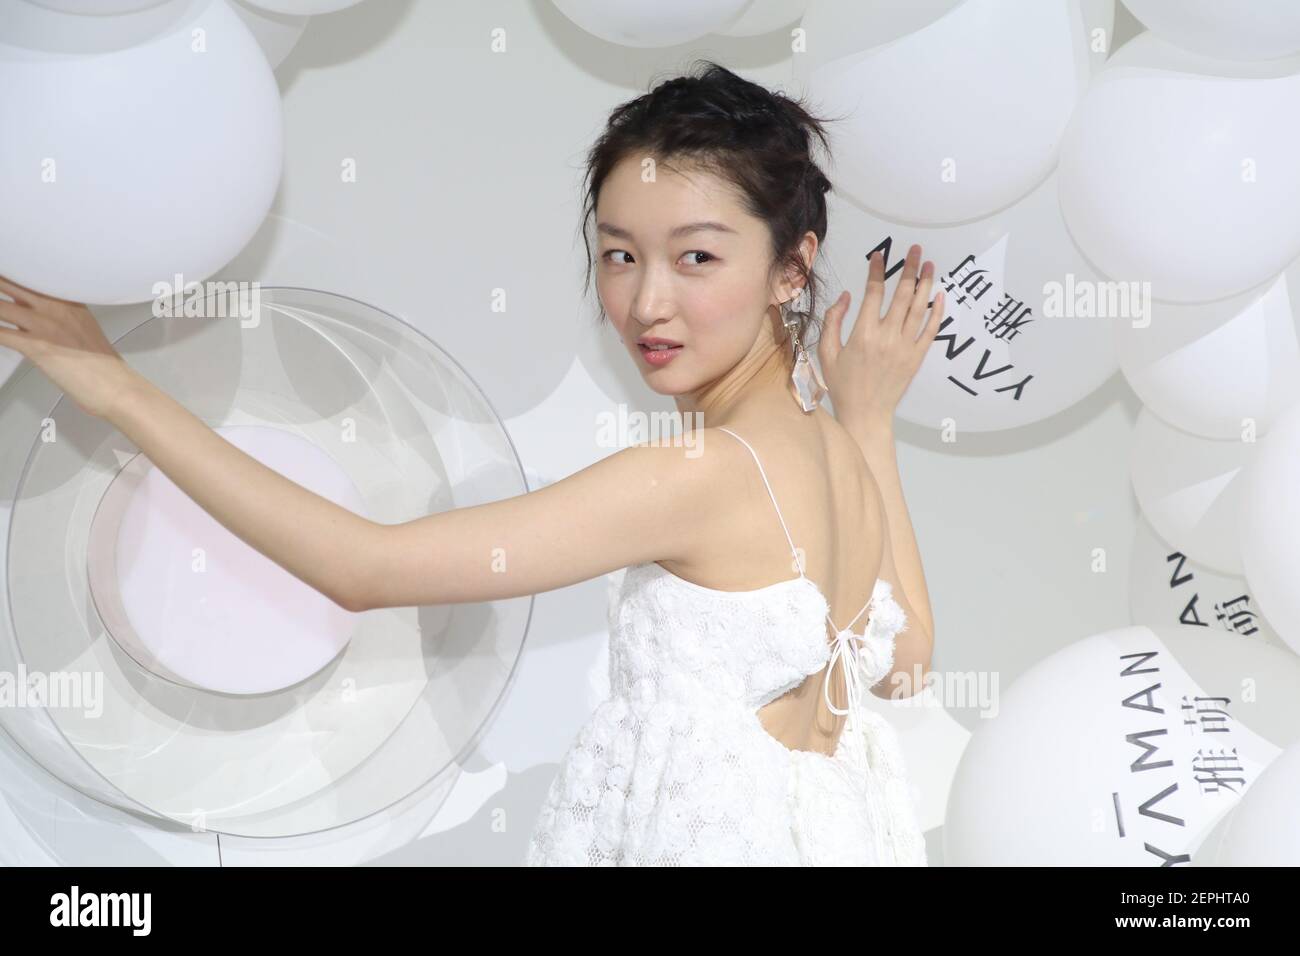 File--Chinese actress Zhou Dongyu attends the 18th Shanghai International  Film Festival in Shanghai, China, 13 June 2015. Chinese actress Zhou Dongyu  won Best Actress of 39th Hong Kong Film Awards for her